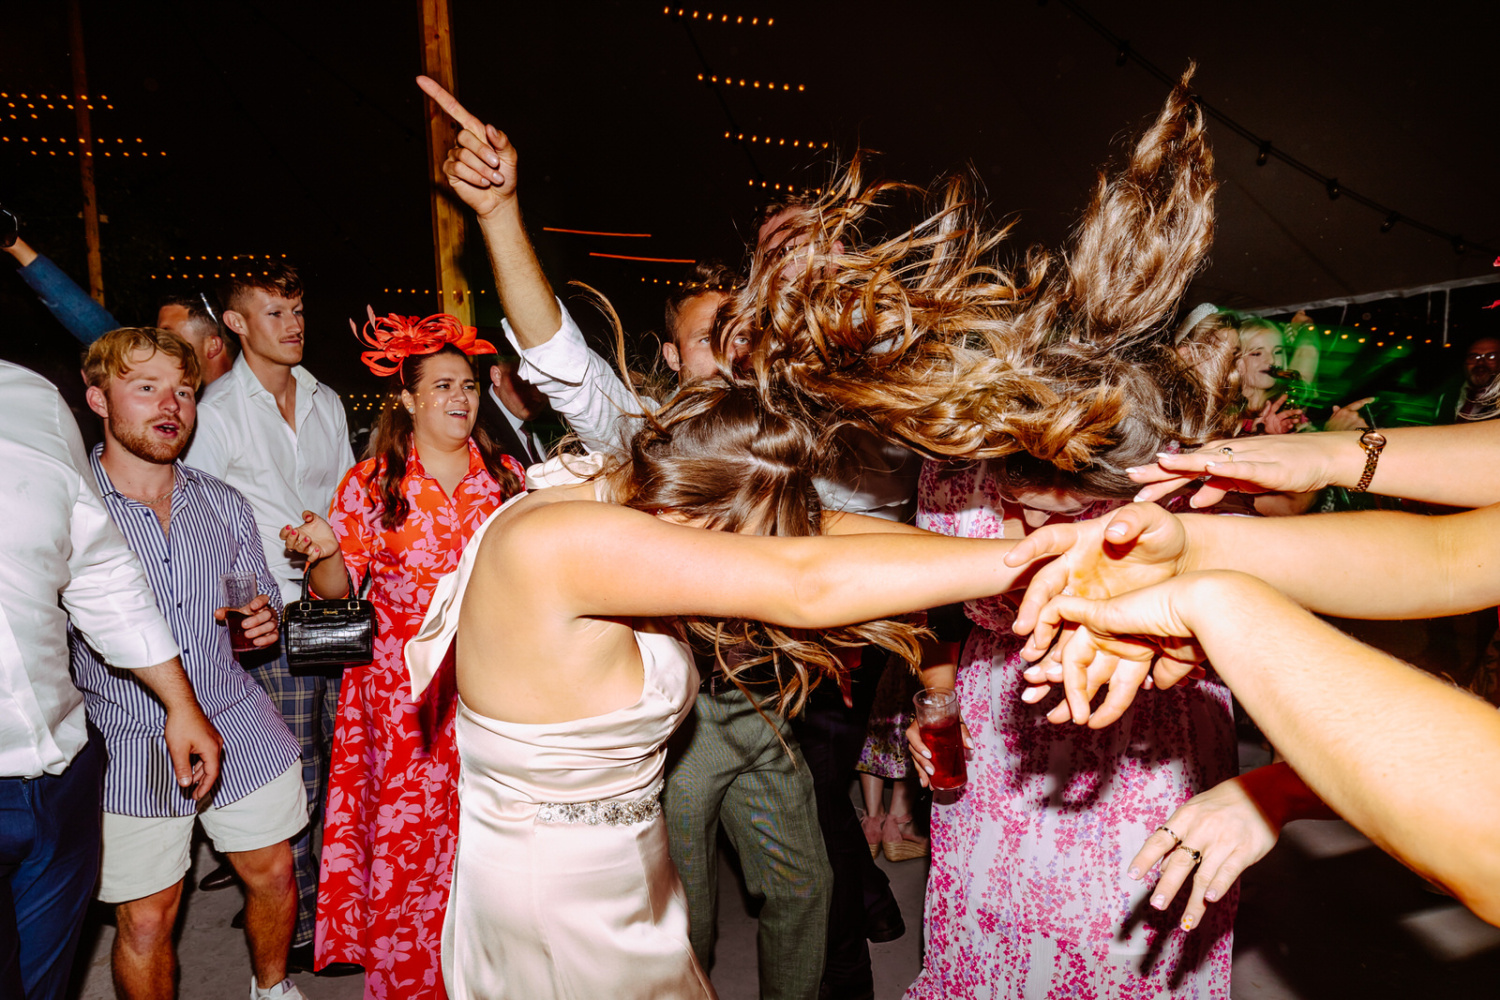 A woman dancing with her hair in the air at a party at Warwickshire farm.